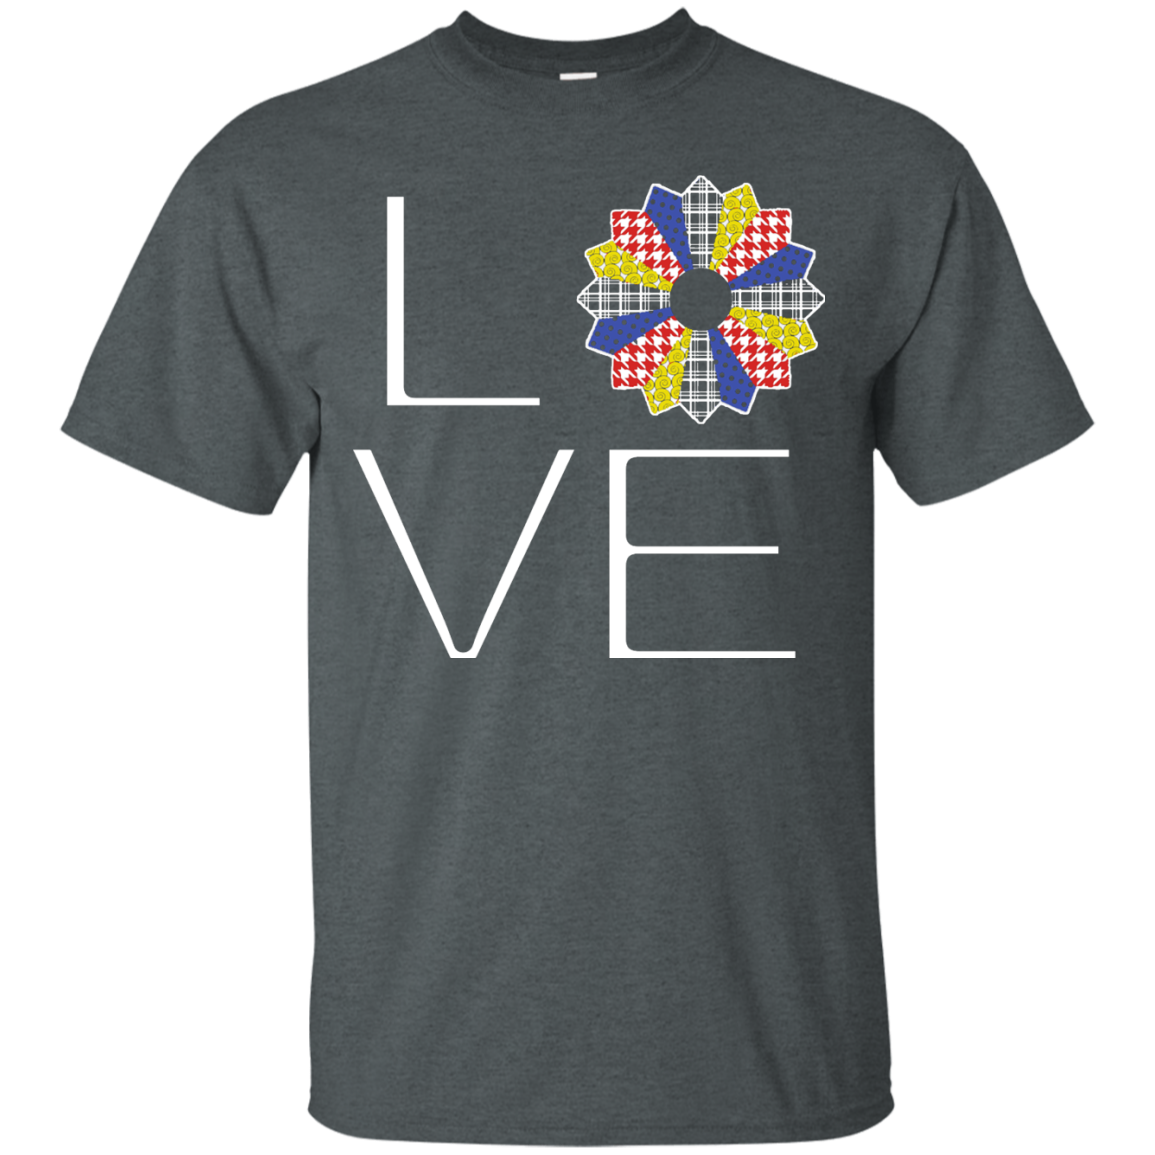 LOVE Quilting (Primary Colors) Custom Ultra Cotton T-Shirt - Crafter4Life - 6